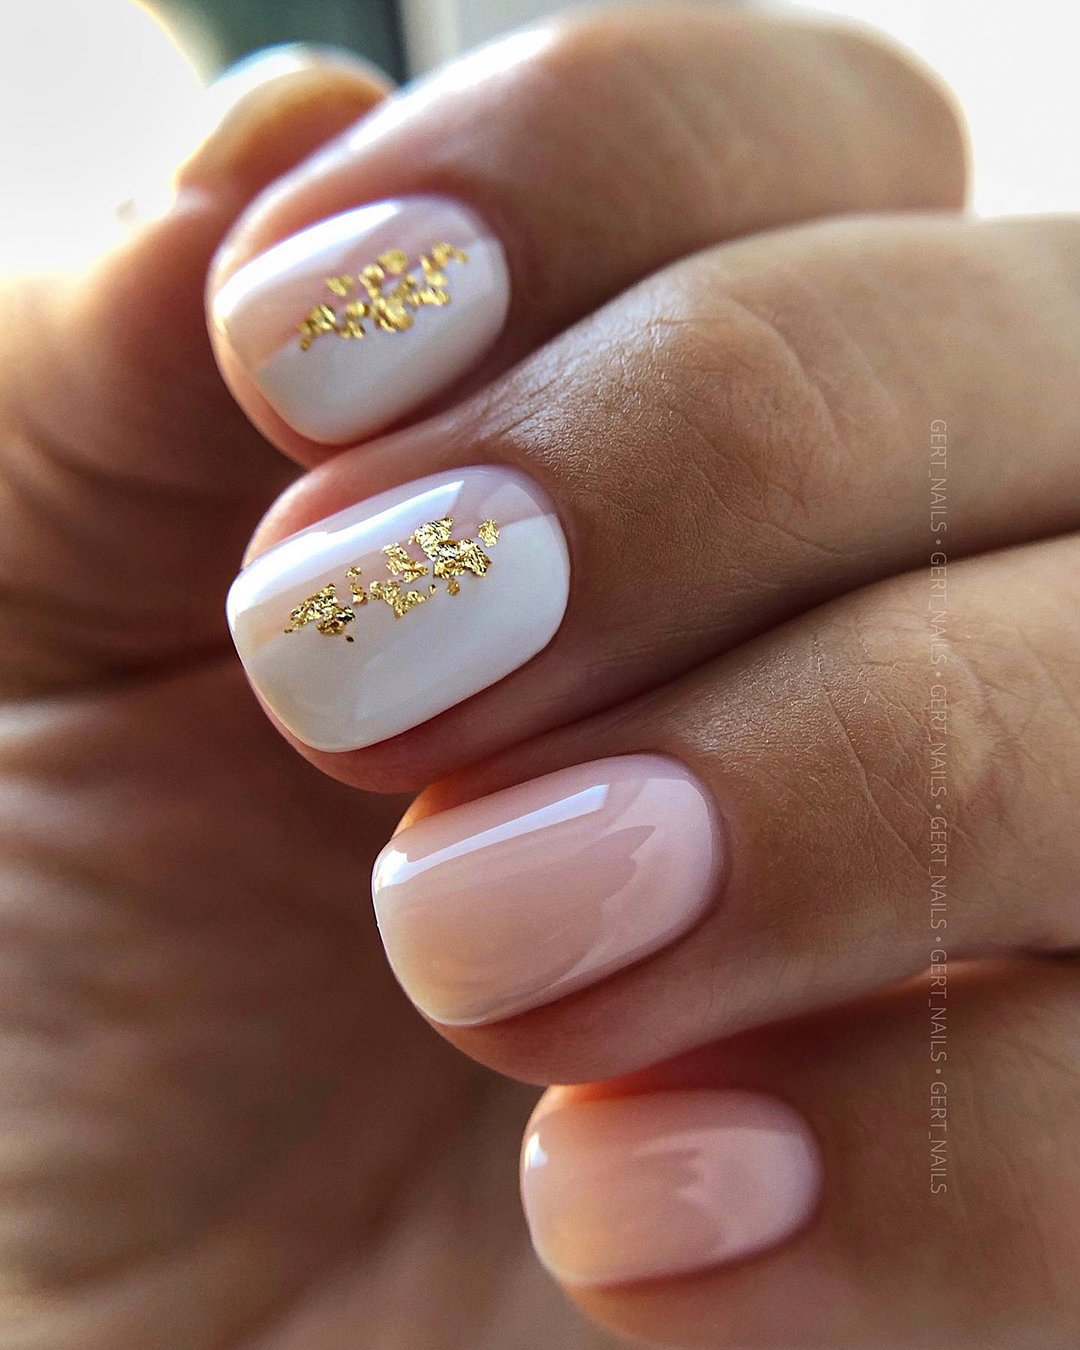 nail design wedding ideas white nude pink with gold foil gert_nails